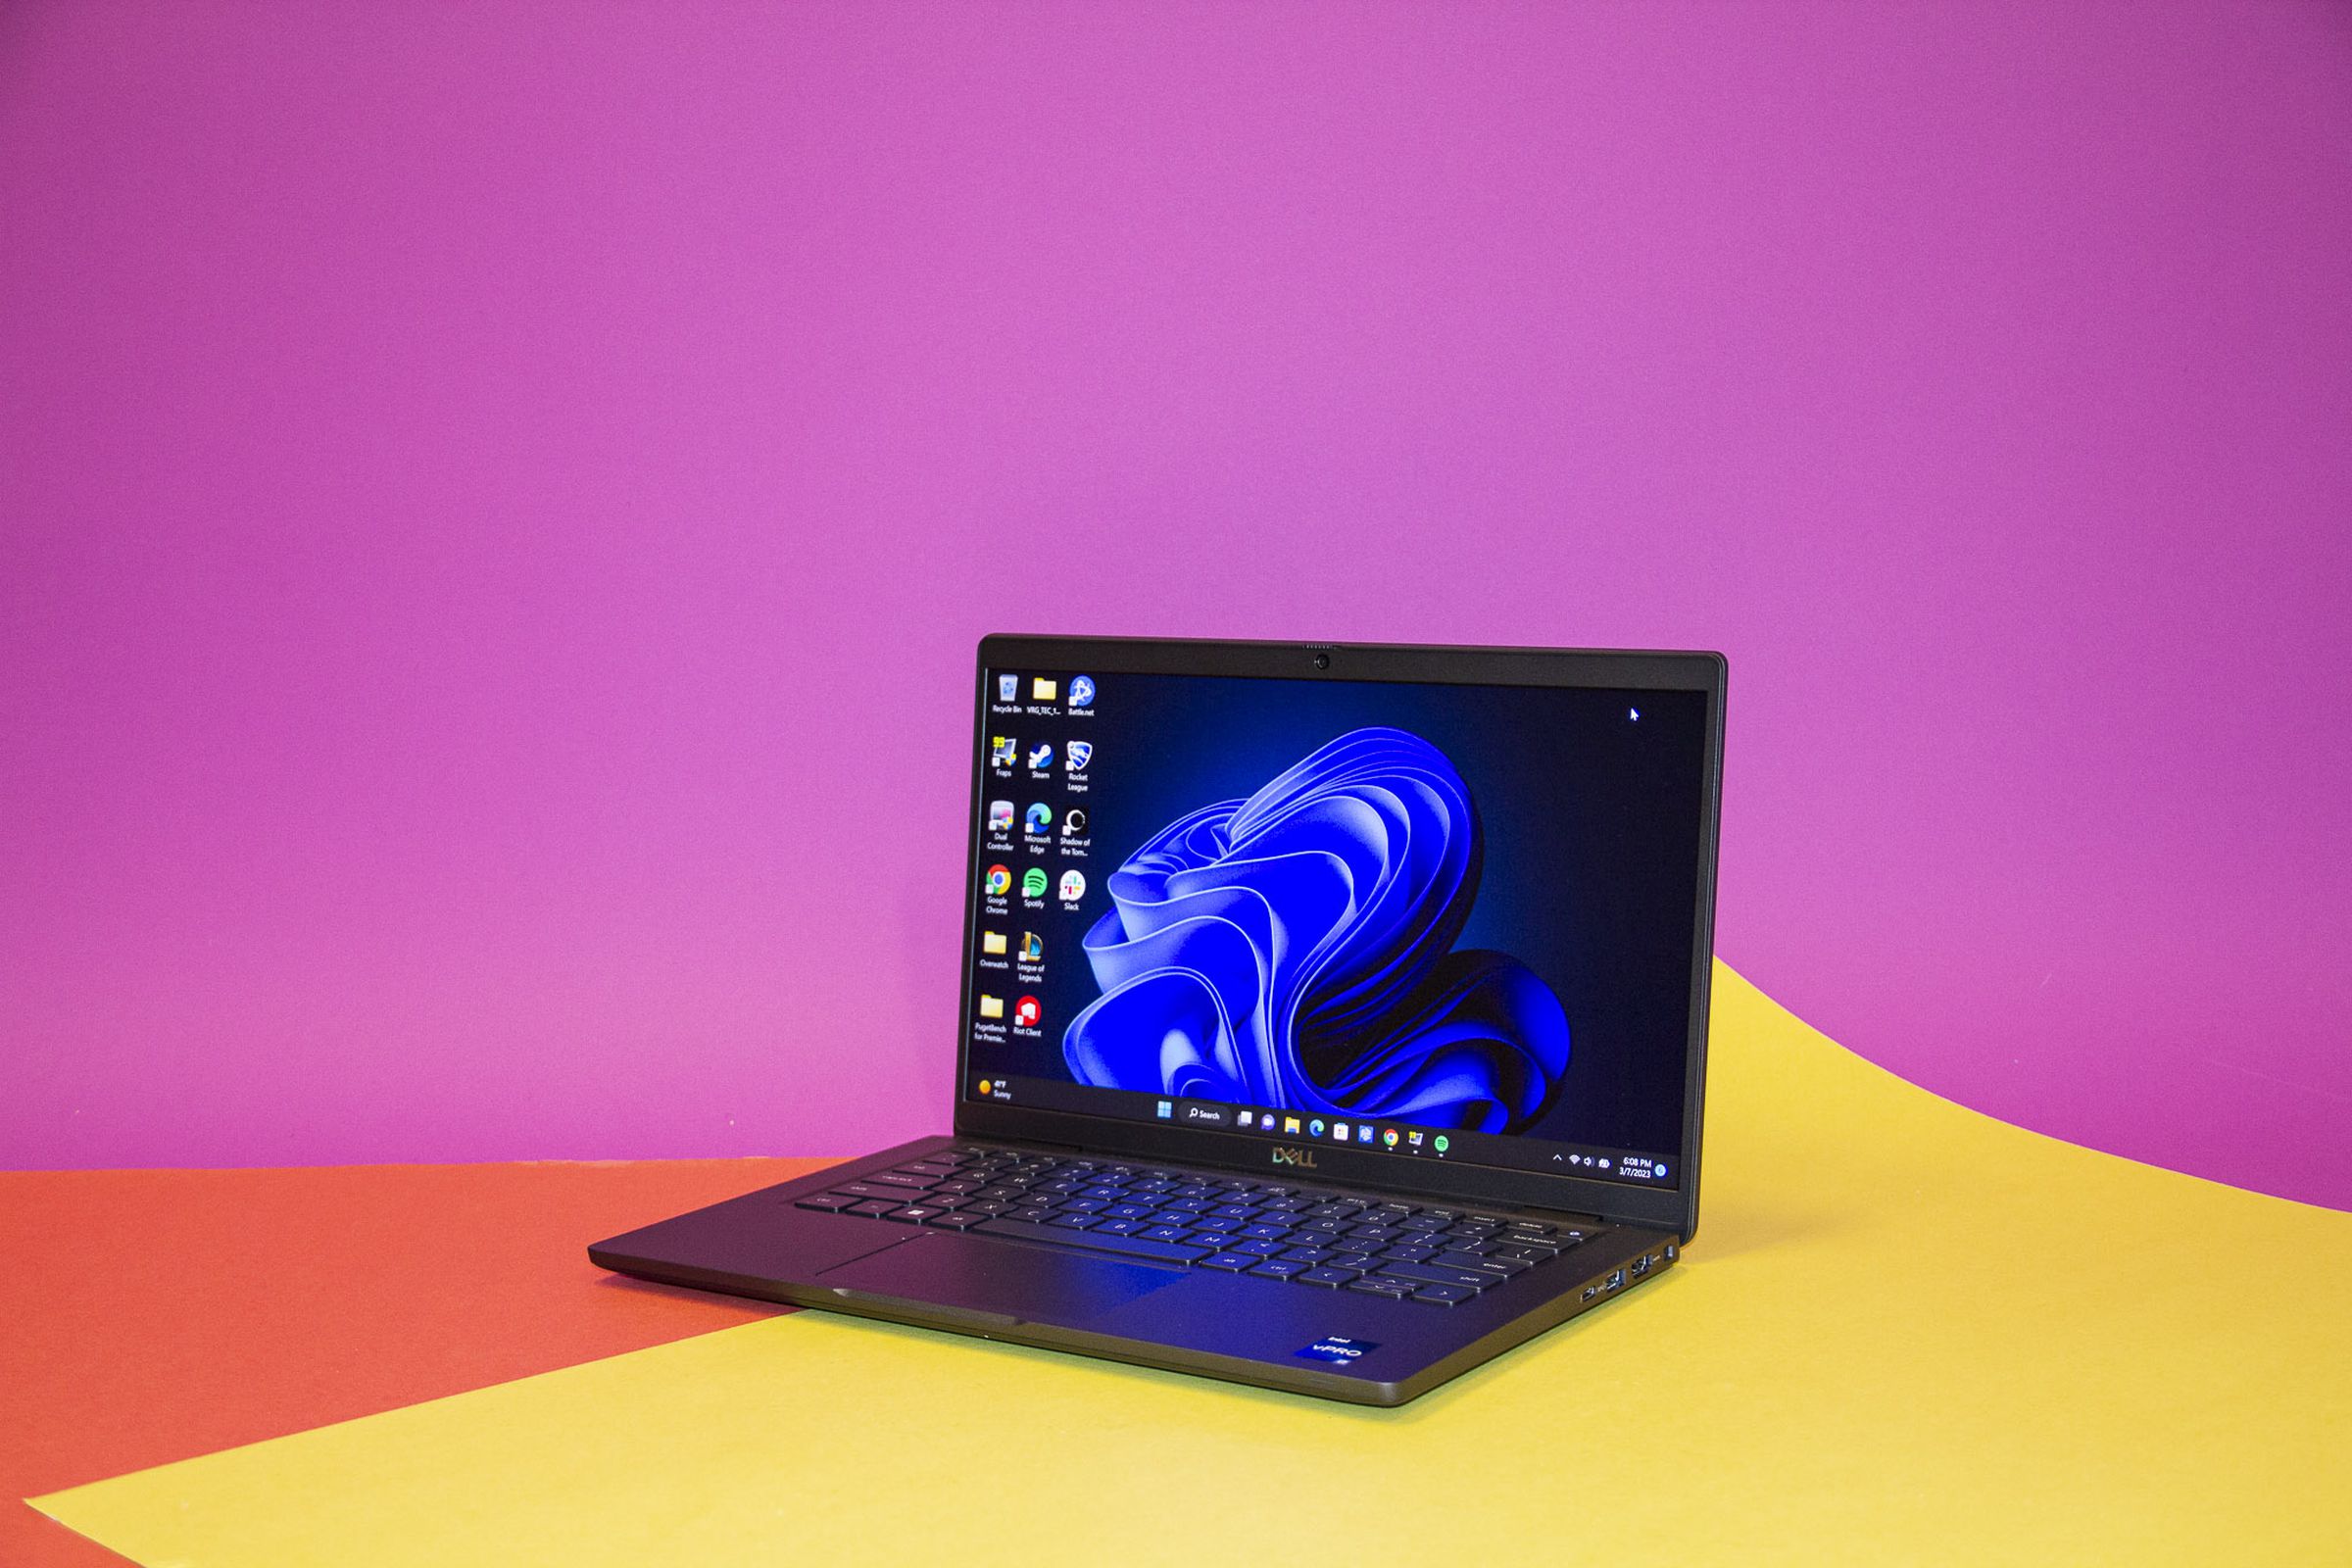 The Dell Latitude 7330 on a yellow and pink background open and angled to the left.